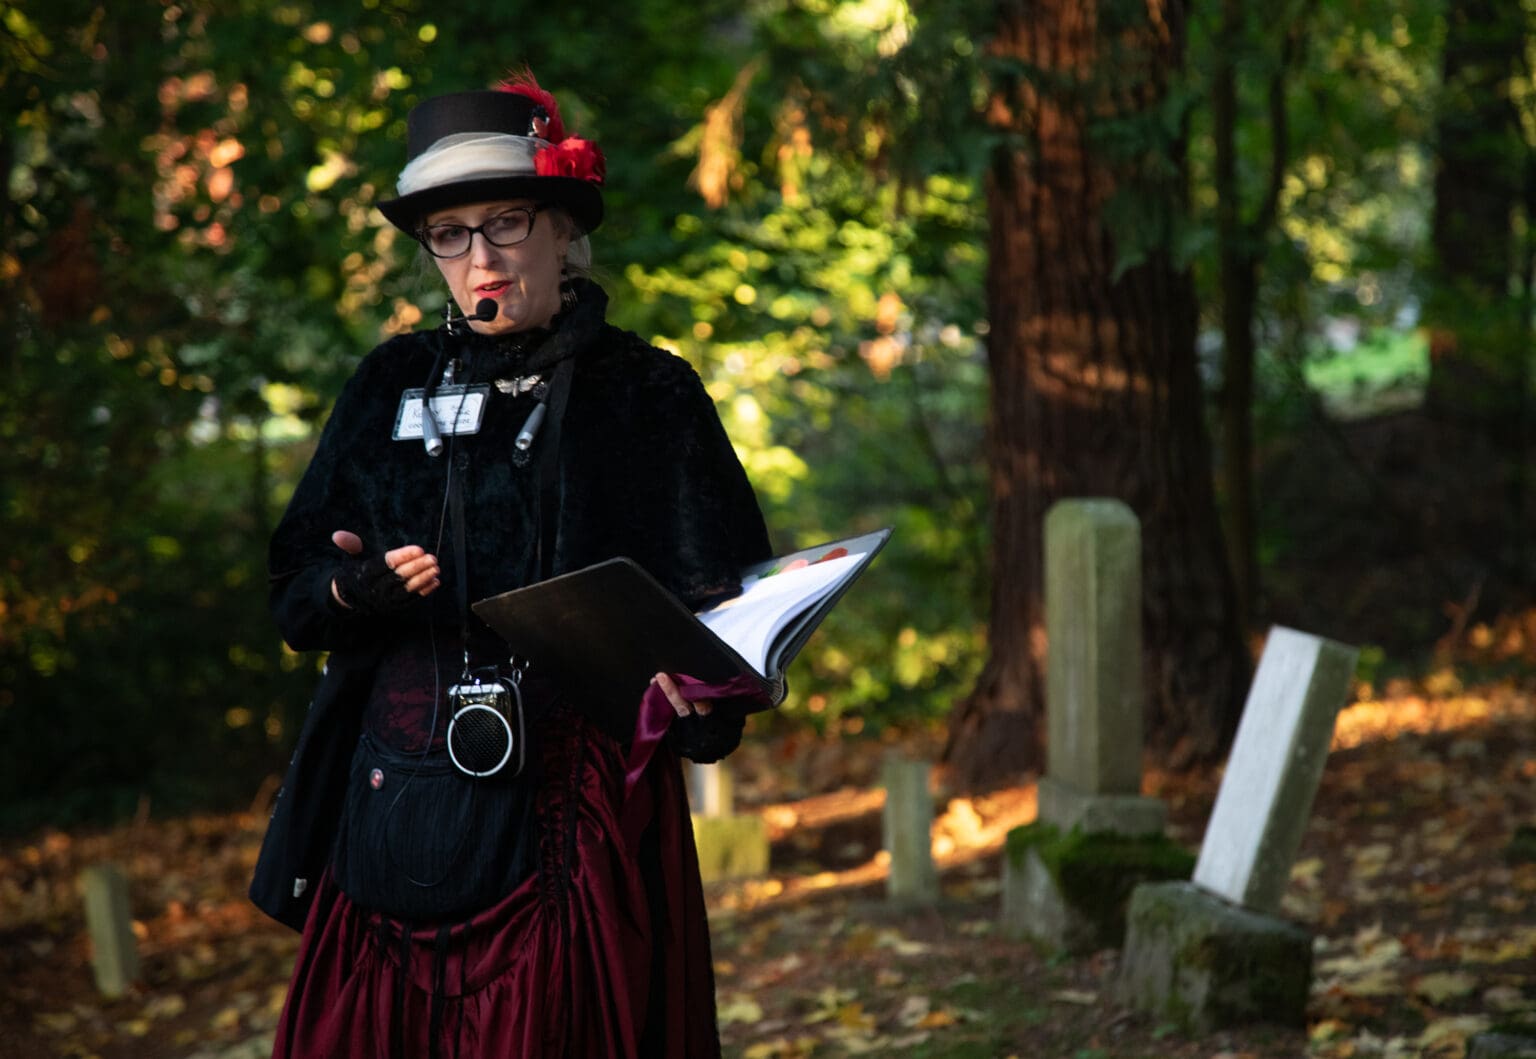 Kolby LaBree of the Good Time Girls tells the history of a gravesite while wearing a kilt.